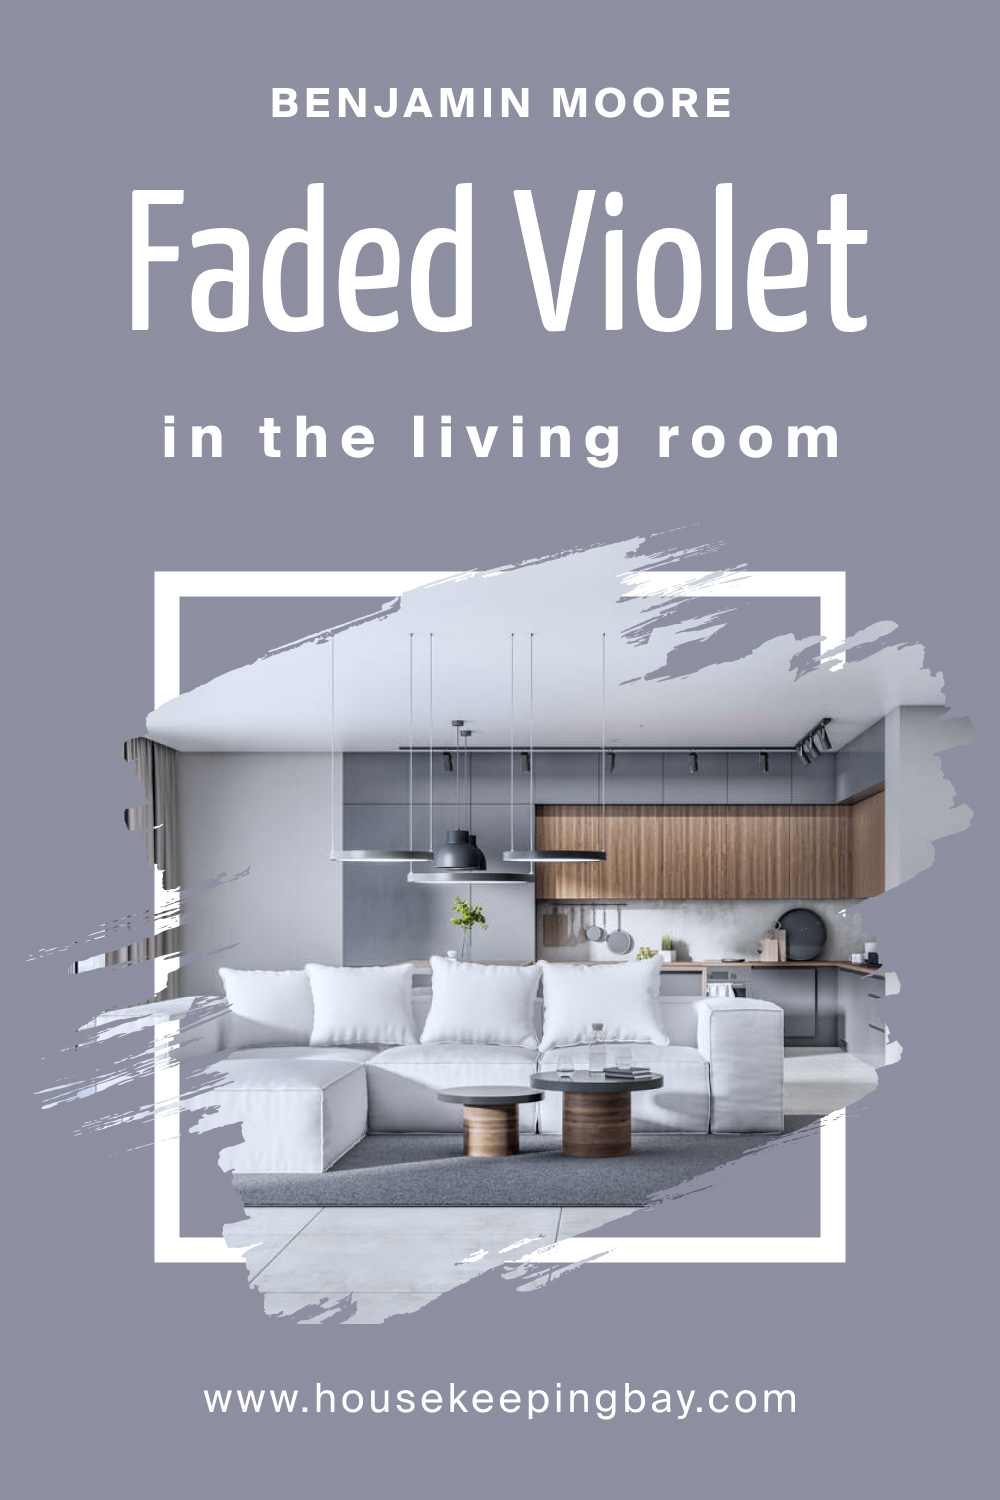 retreat.How to Use Faded Violet CSP-455 in the Living Room?